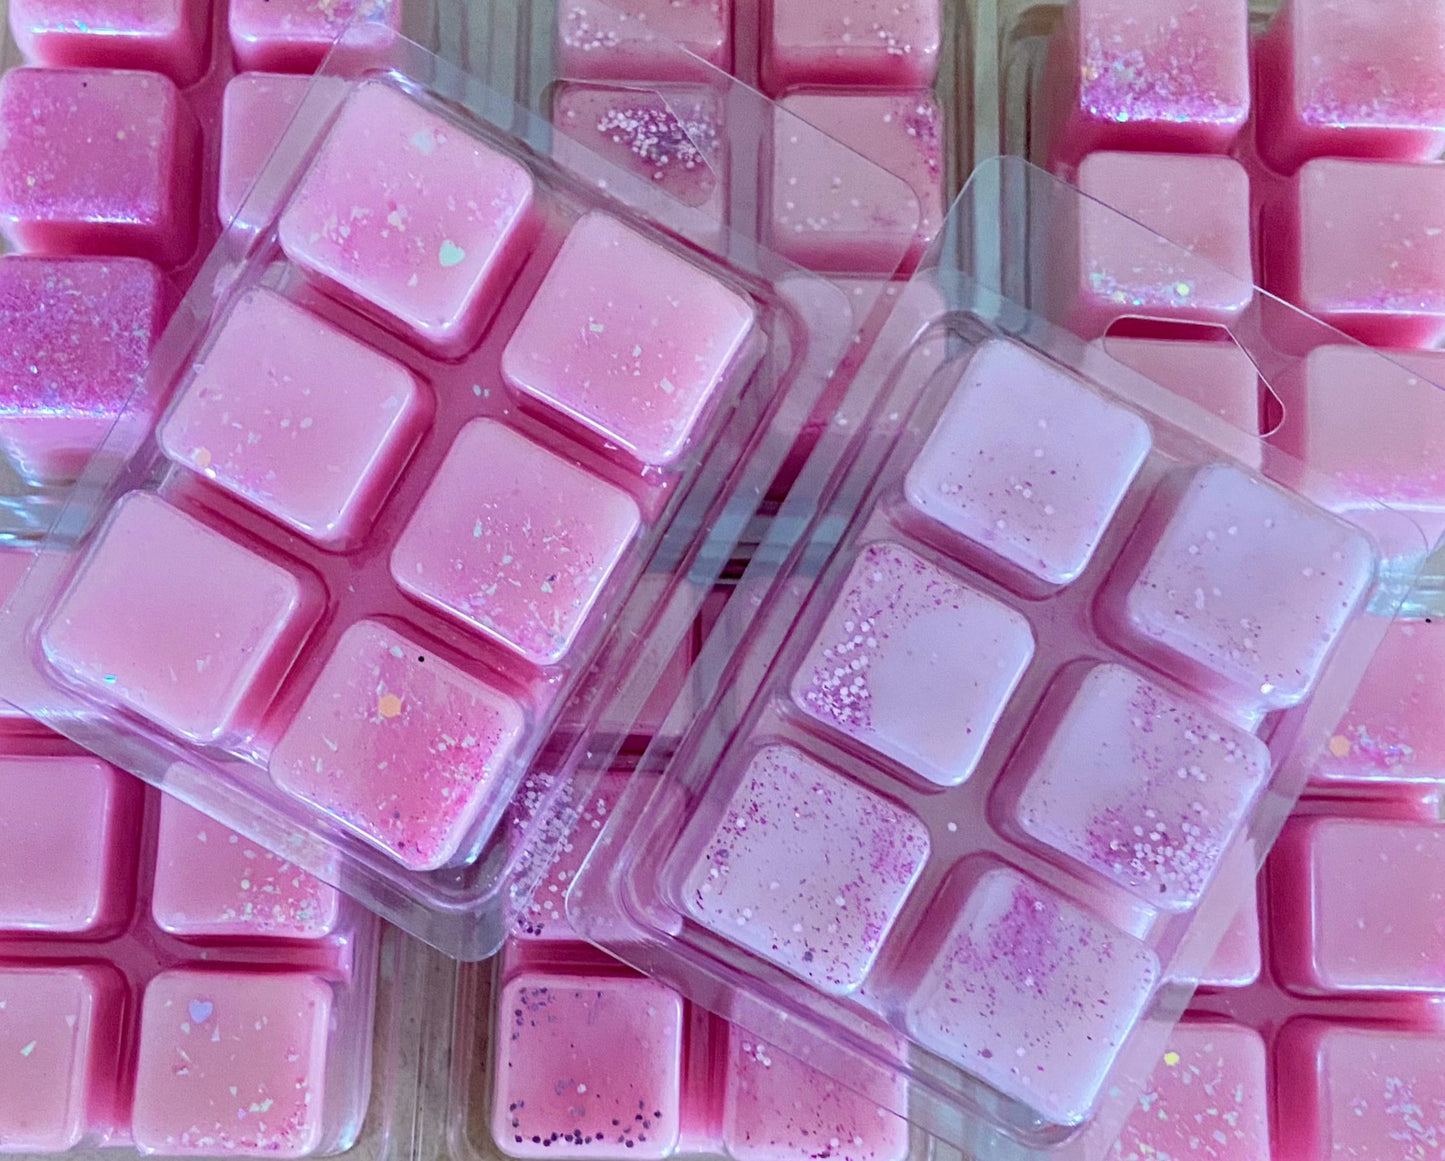 Tray of The Soap Gal x Castle of Dreams Wax Melt sprinkled with glitter, displayed in clear plastic packaging on a pink background.